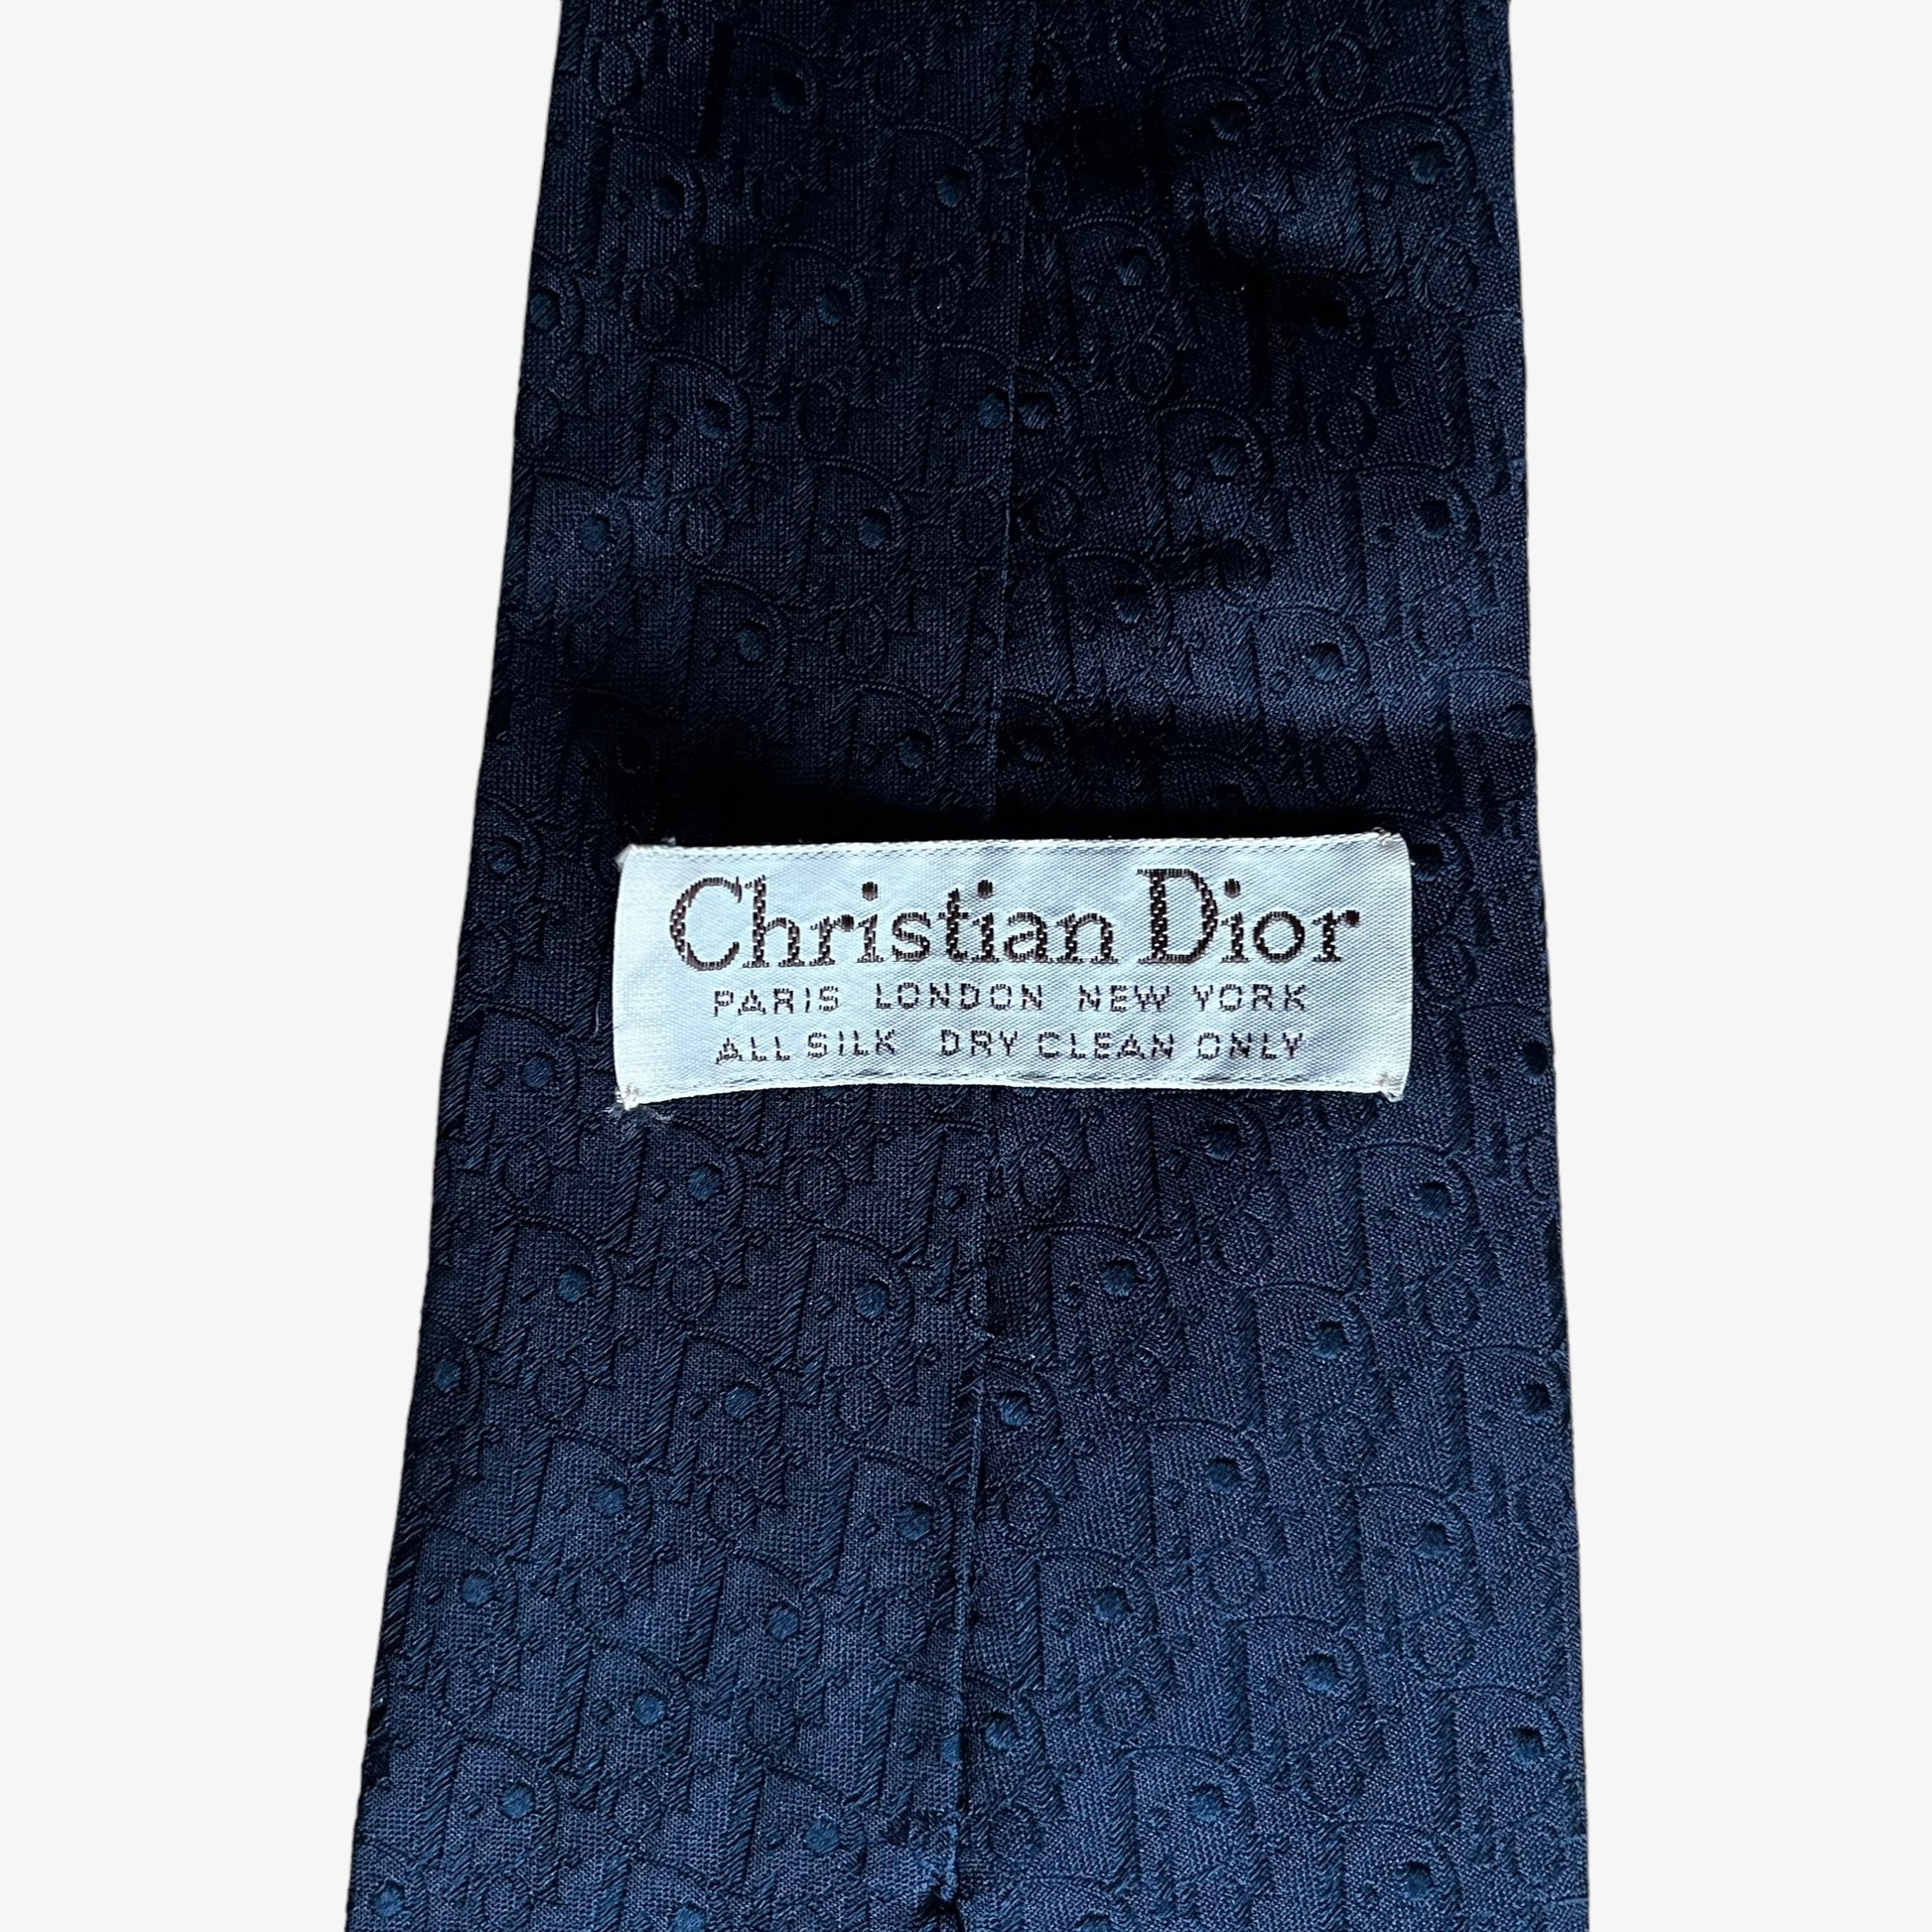 Vintage 80s Christian Dior Embossed Spell Out Silk Tie Label - Casspios Dream